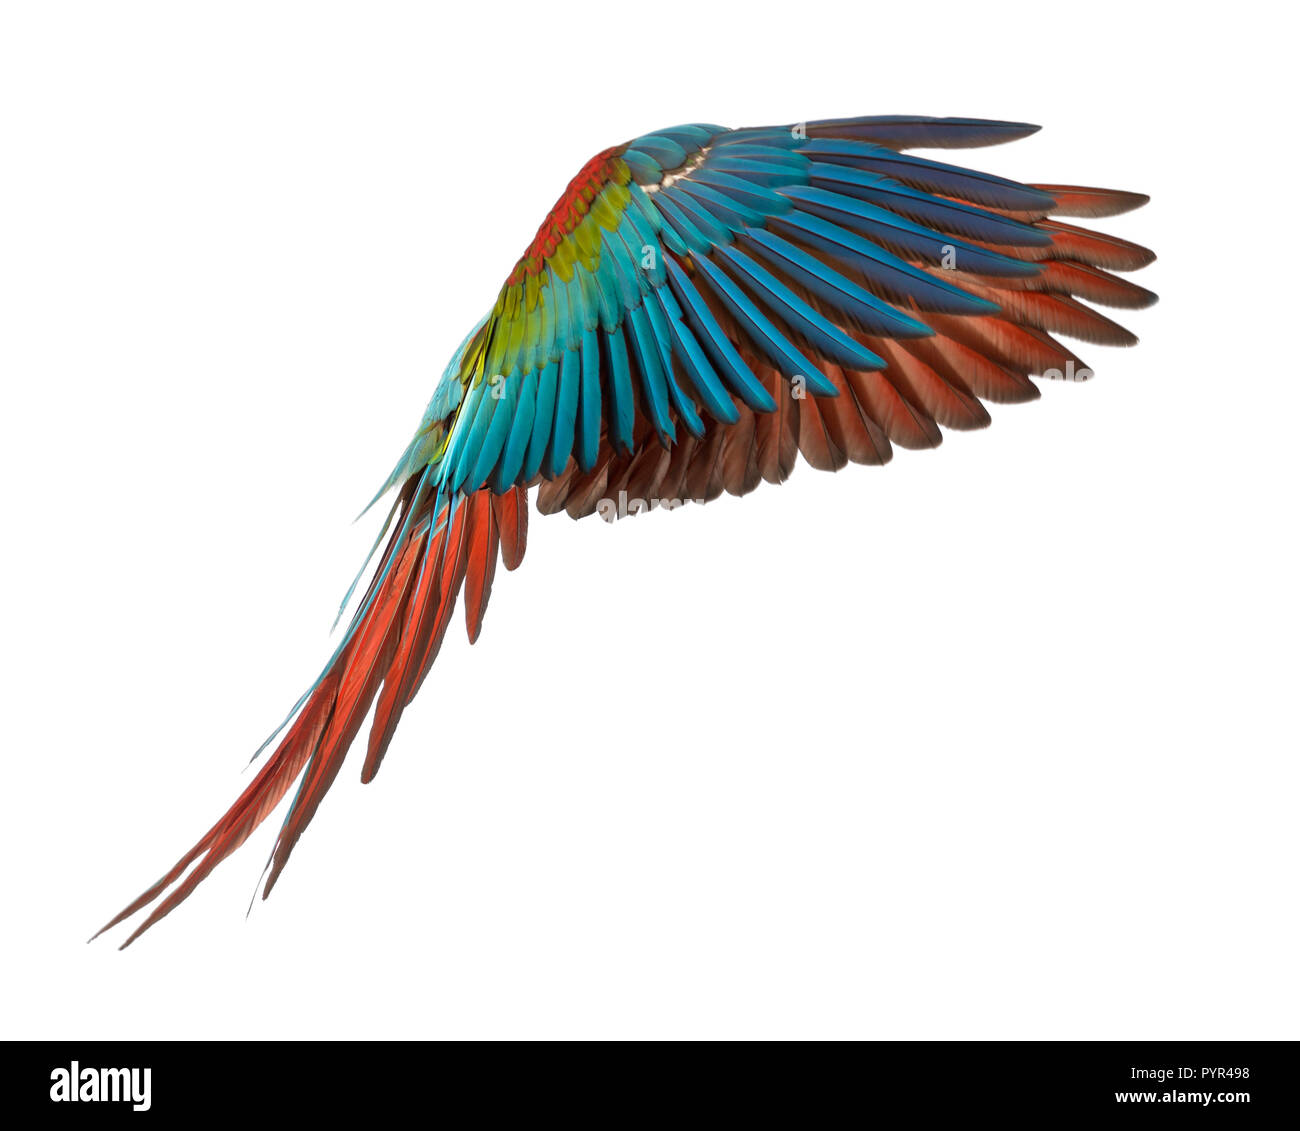 Green-winged Macaw, Ara chloropterus, 1 year old, flying in front of white background Stock Photo